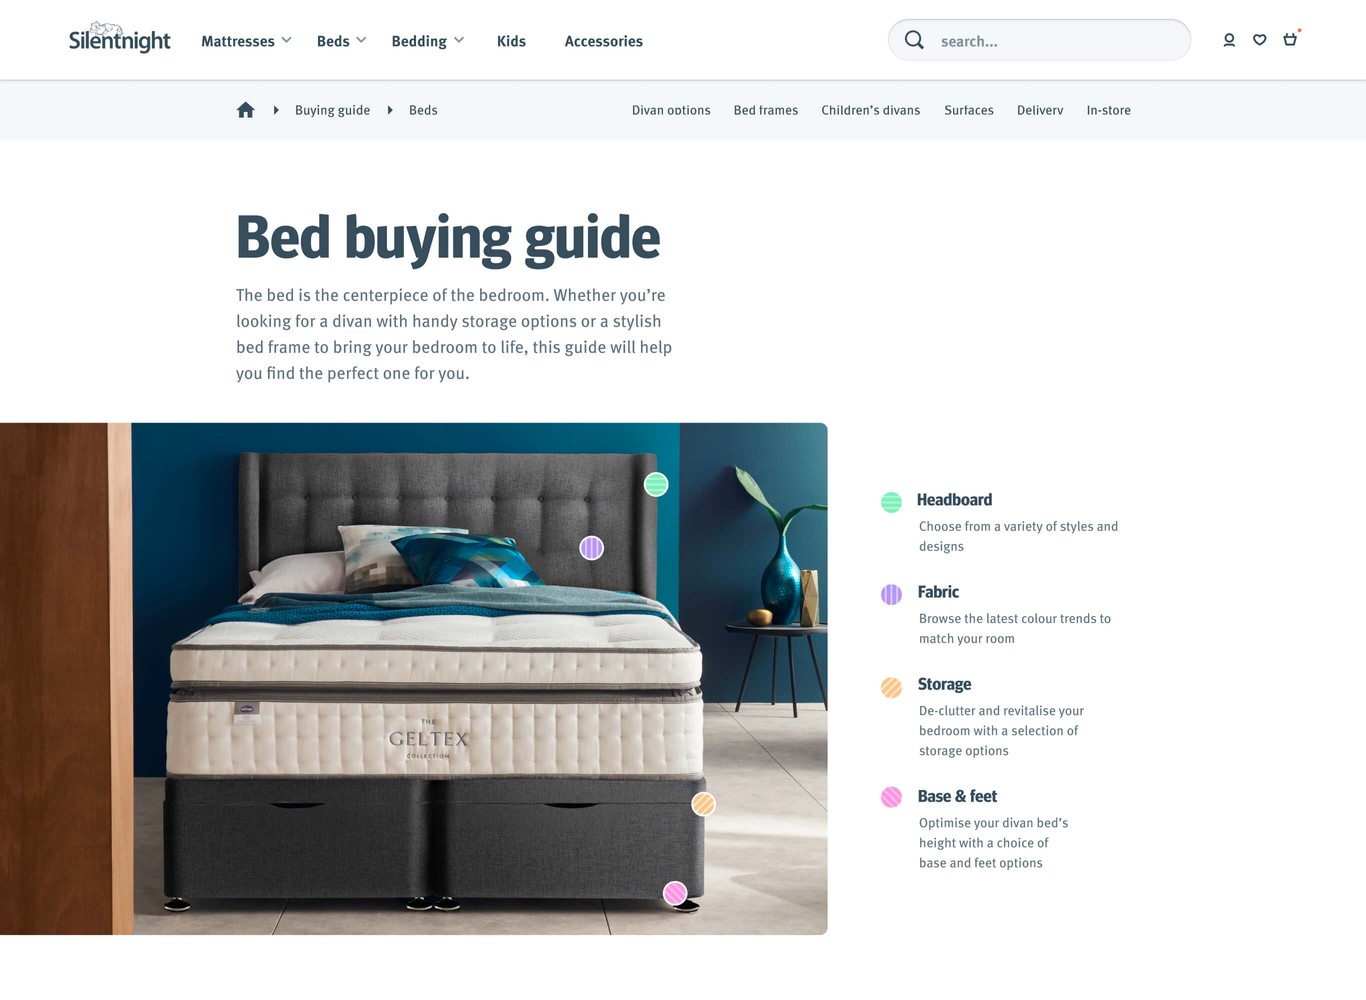 The desktop version of the introduction for the mattresses buying guide.